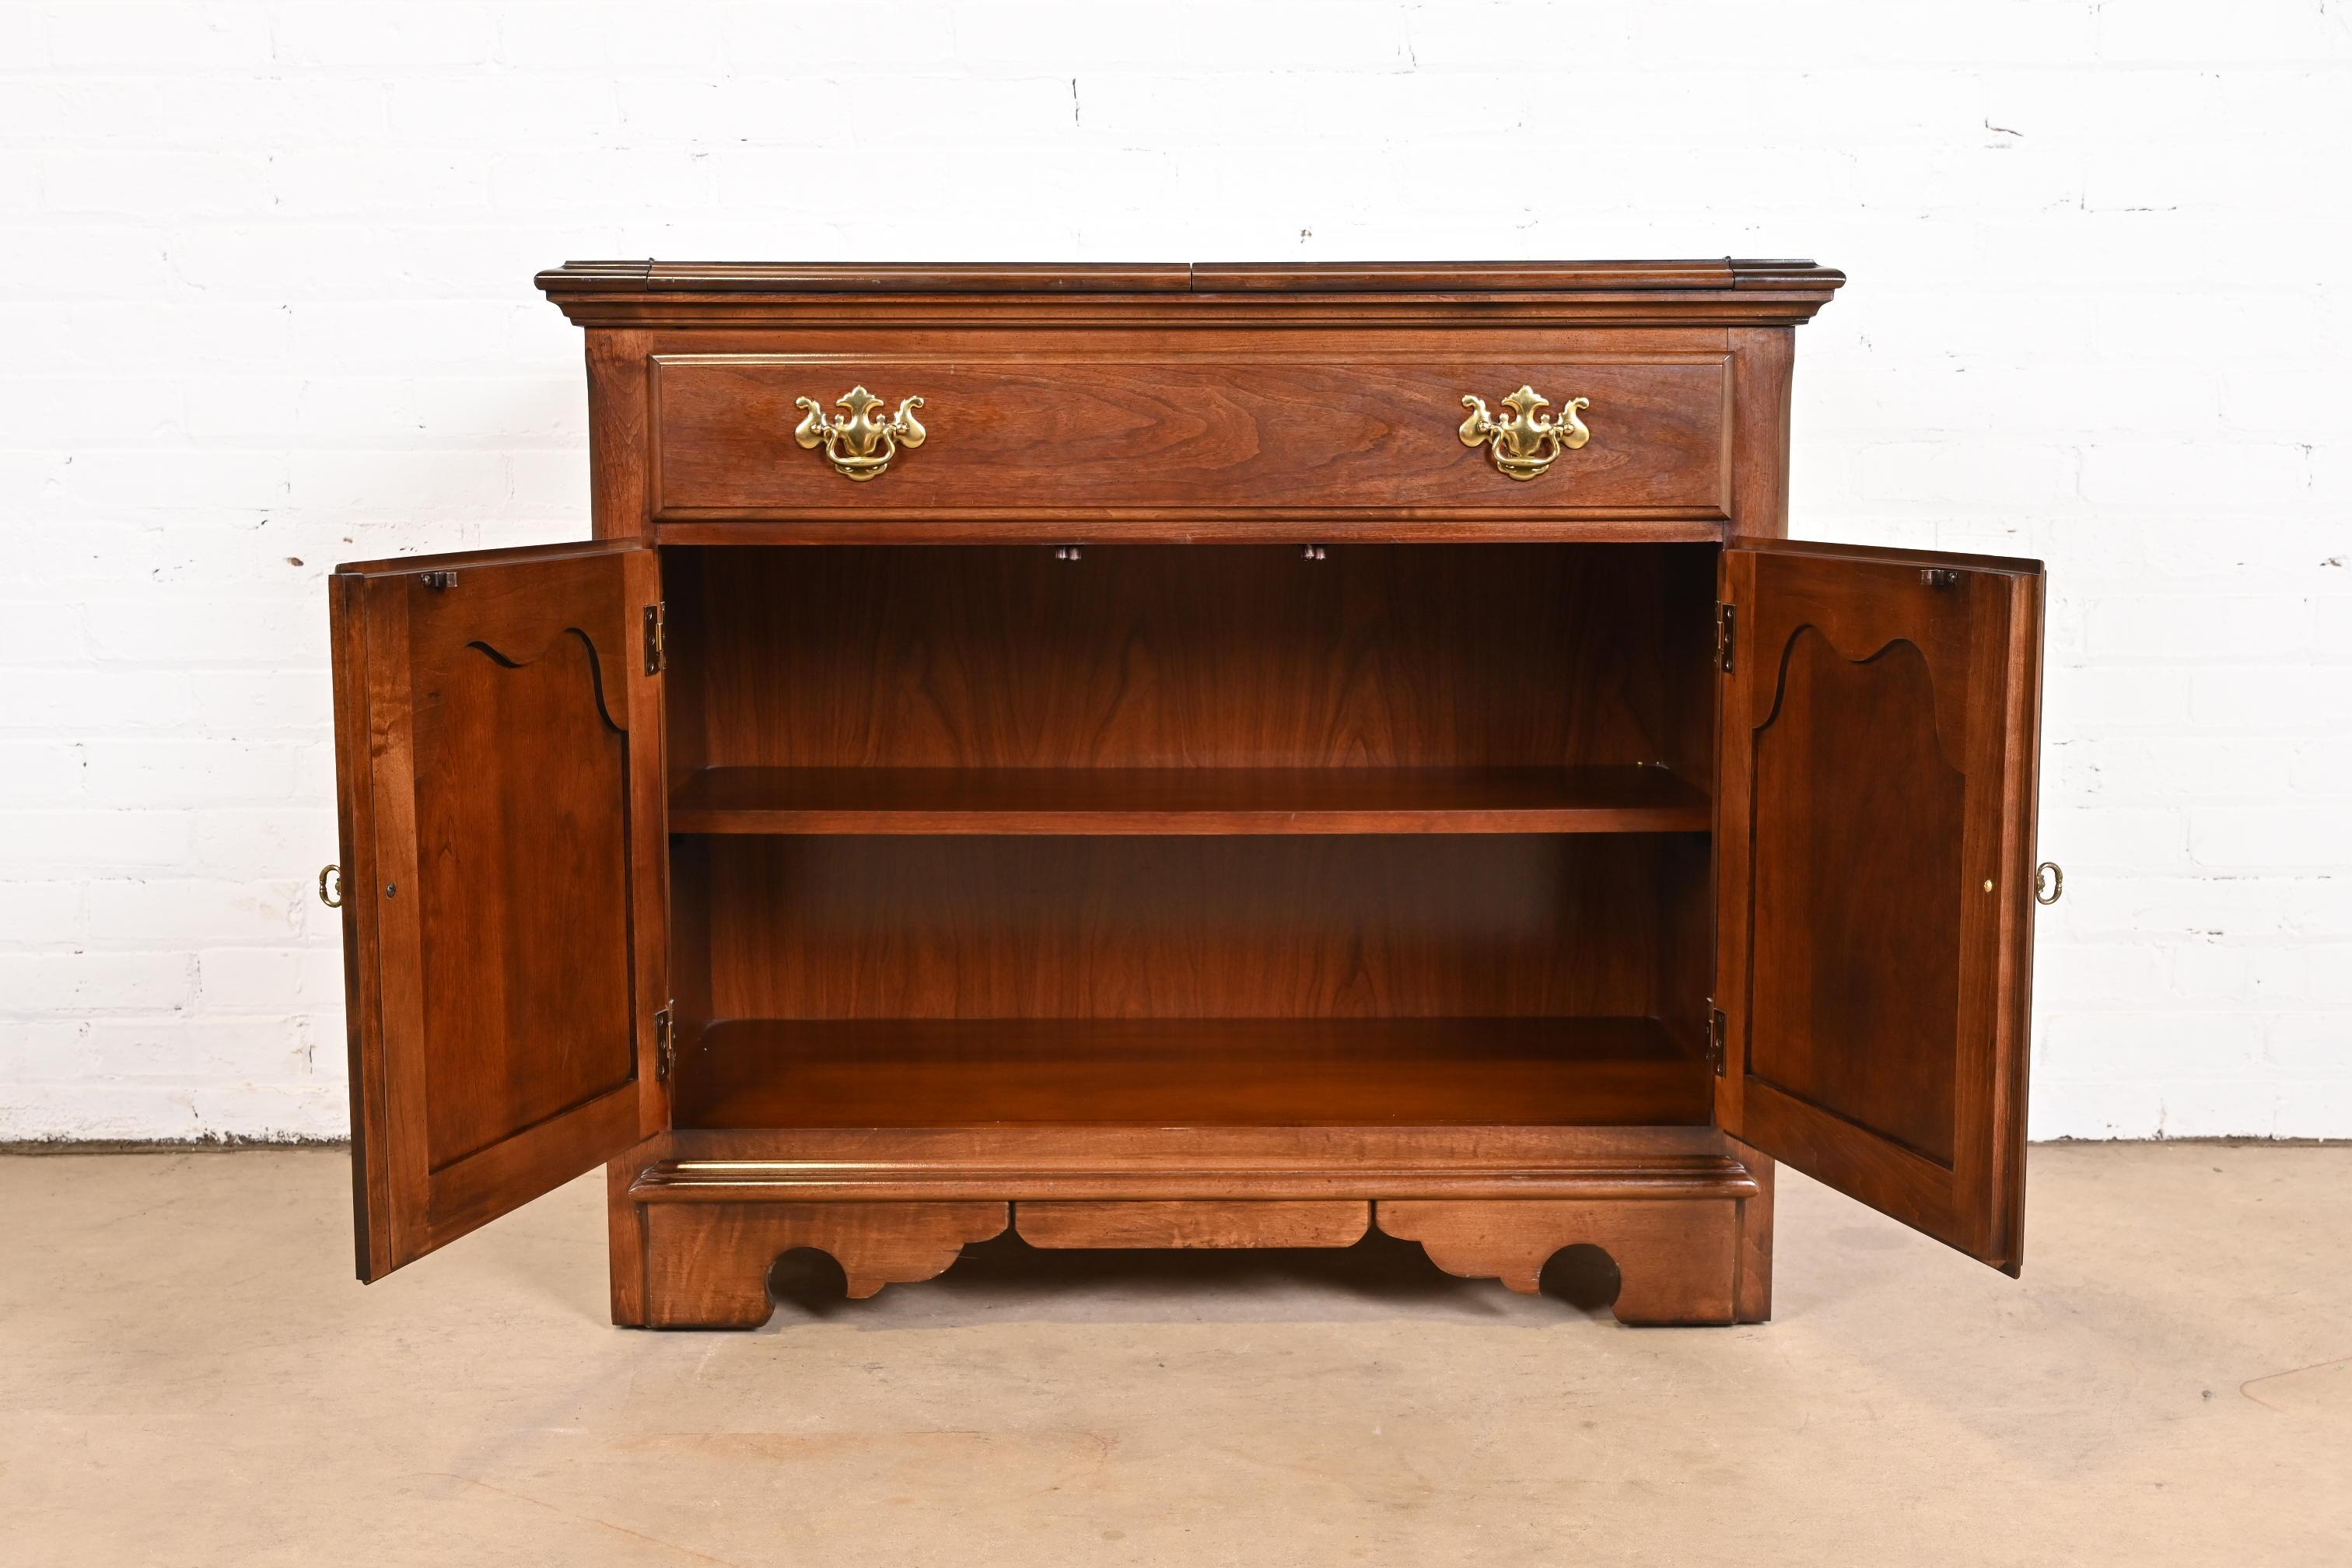 Thomasville Georgian Solid Cherry Wood Flip Top Server or Bar Cabinet For Sale 3